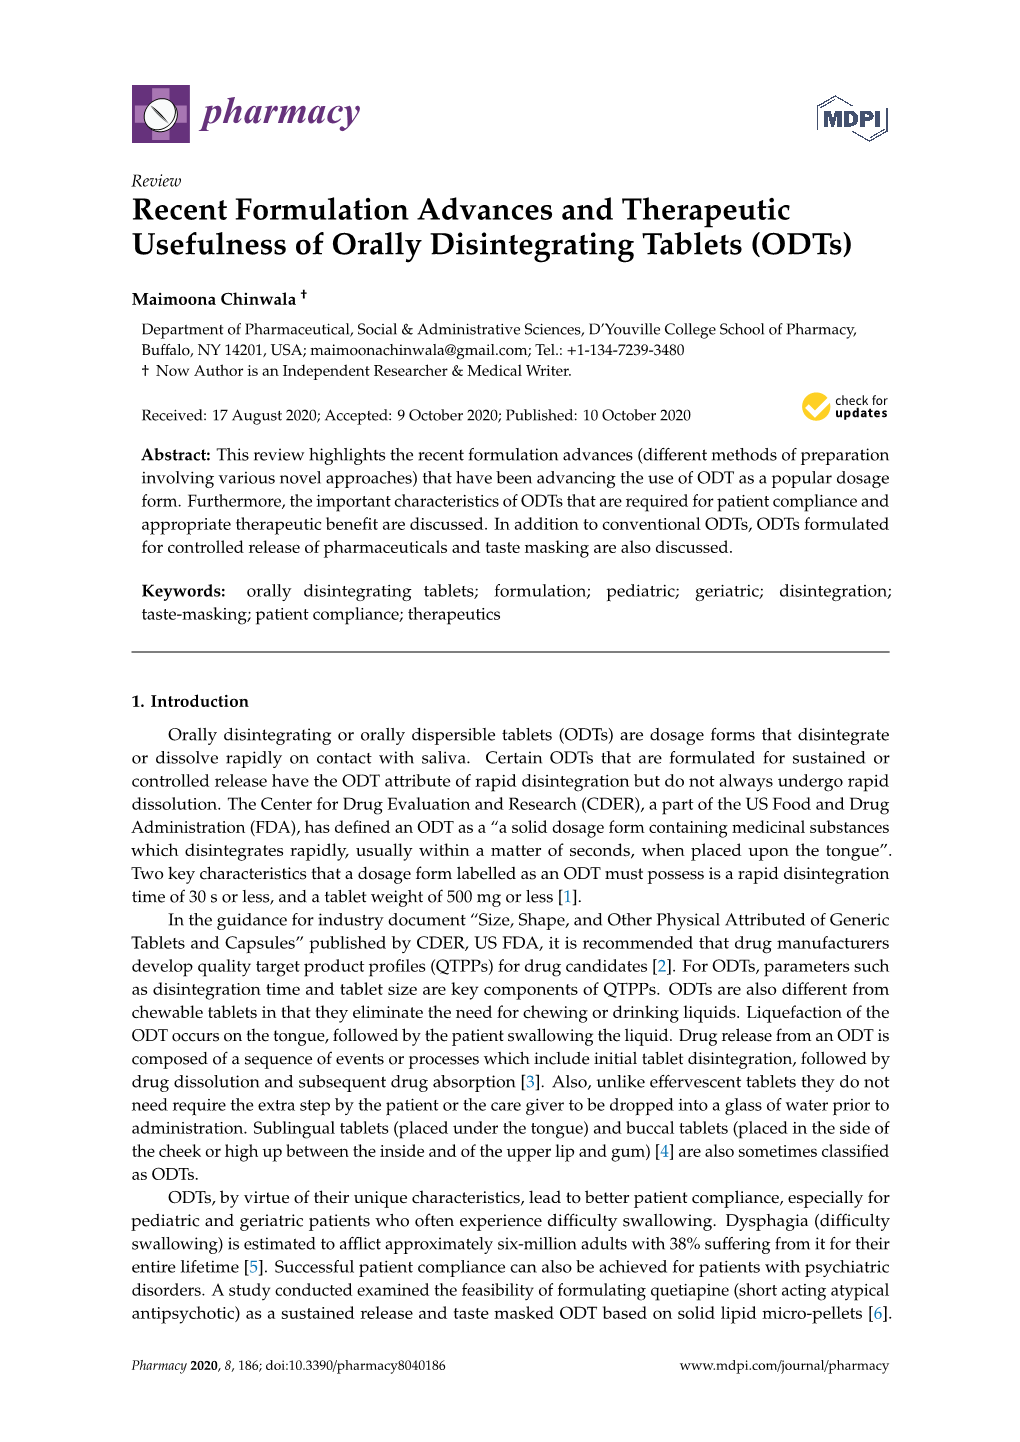 Recent Formulation Advances and Therapeutic Usefulness of Orally Disintegrating Tablets (Odts)